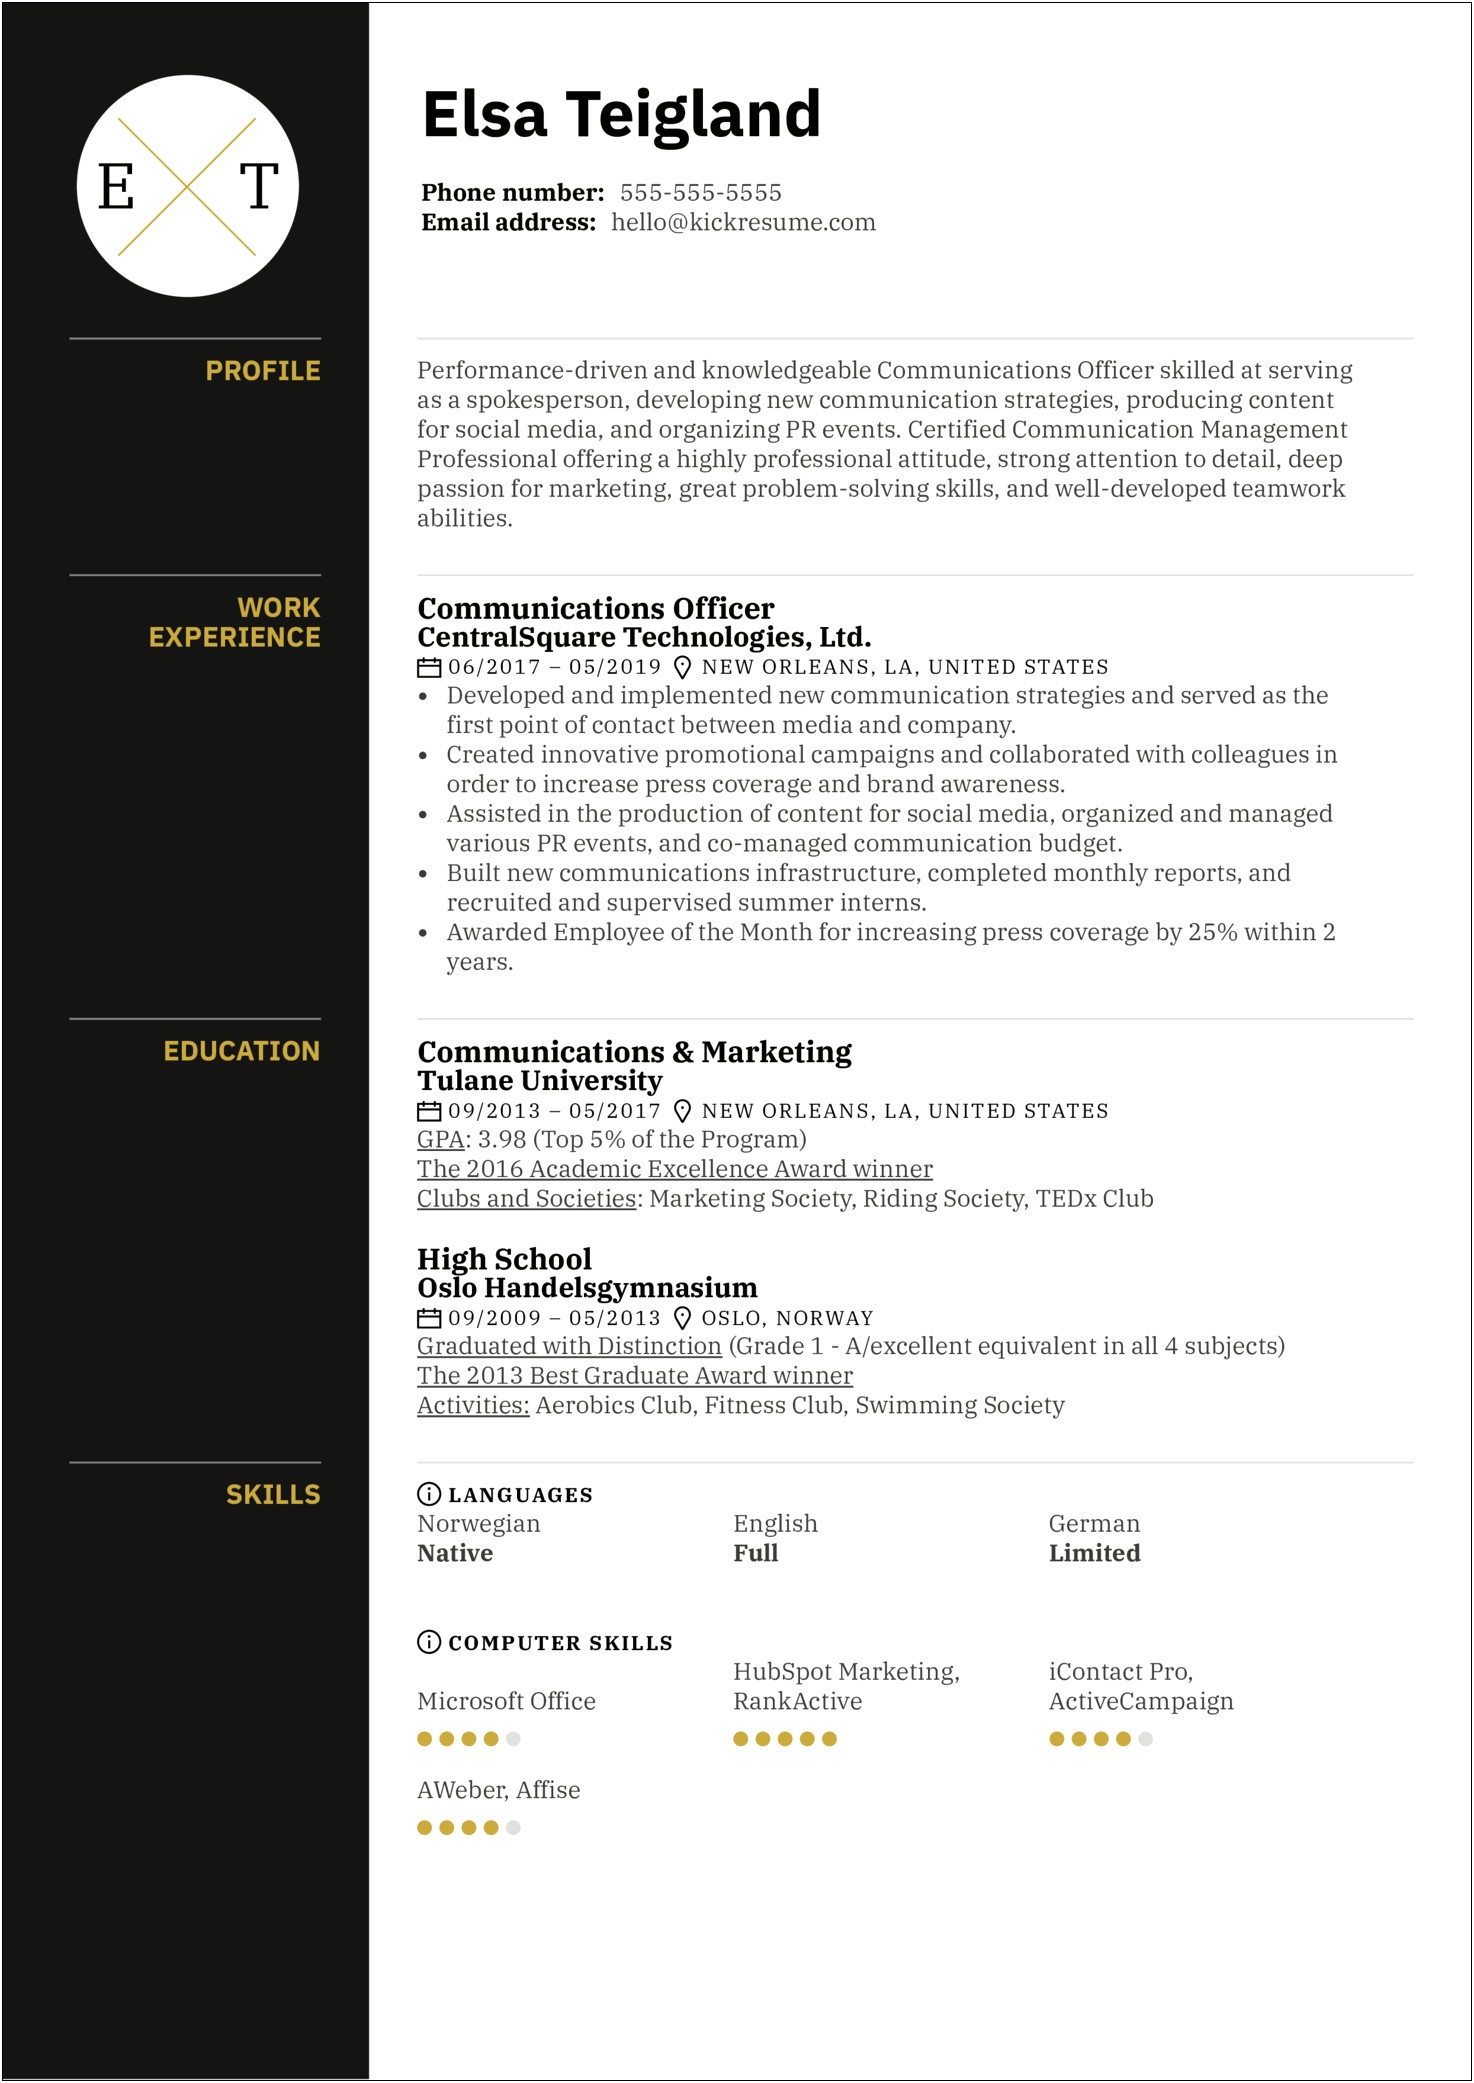 Excellent Verbal And Written Communication Skills Resume